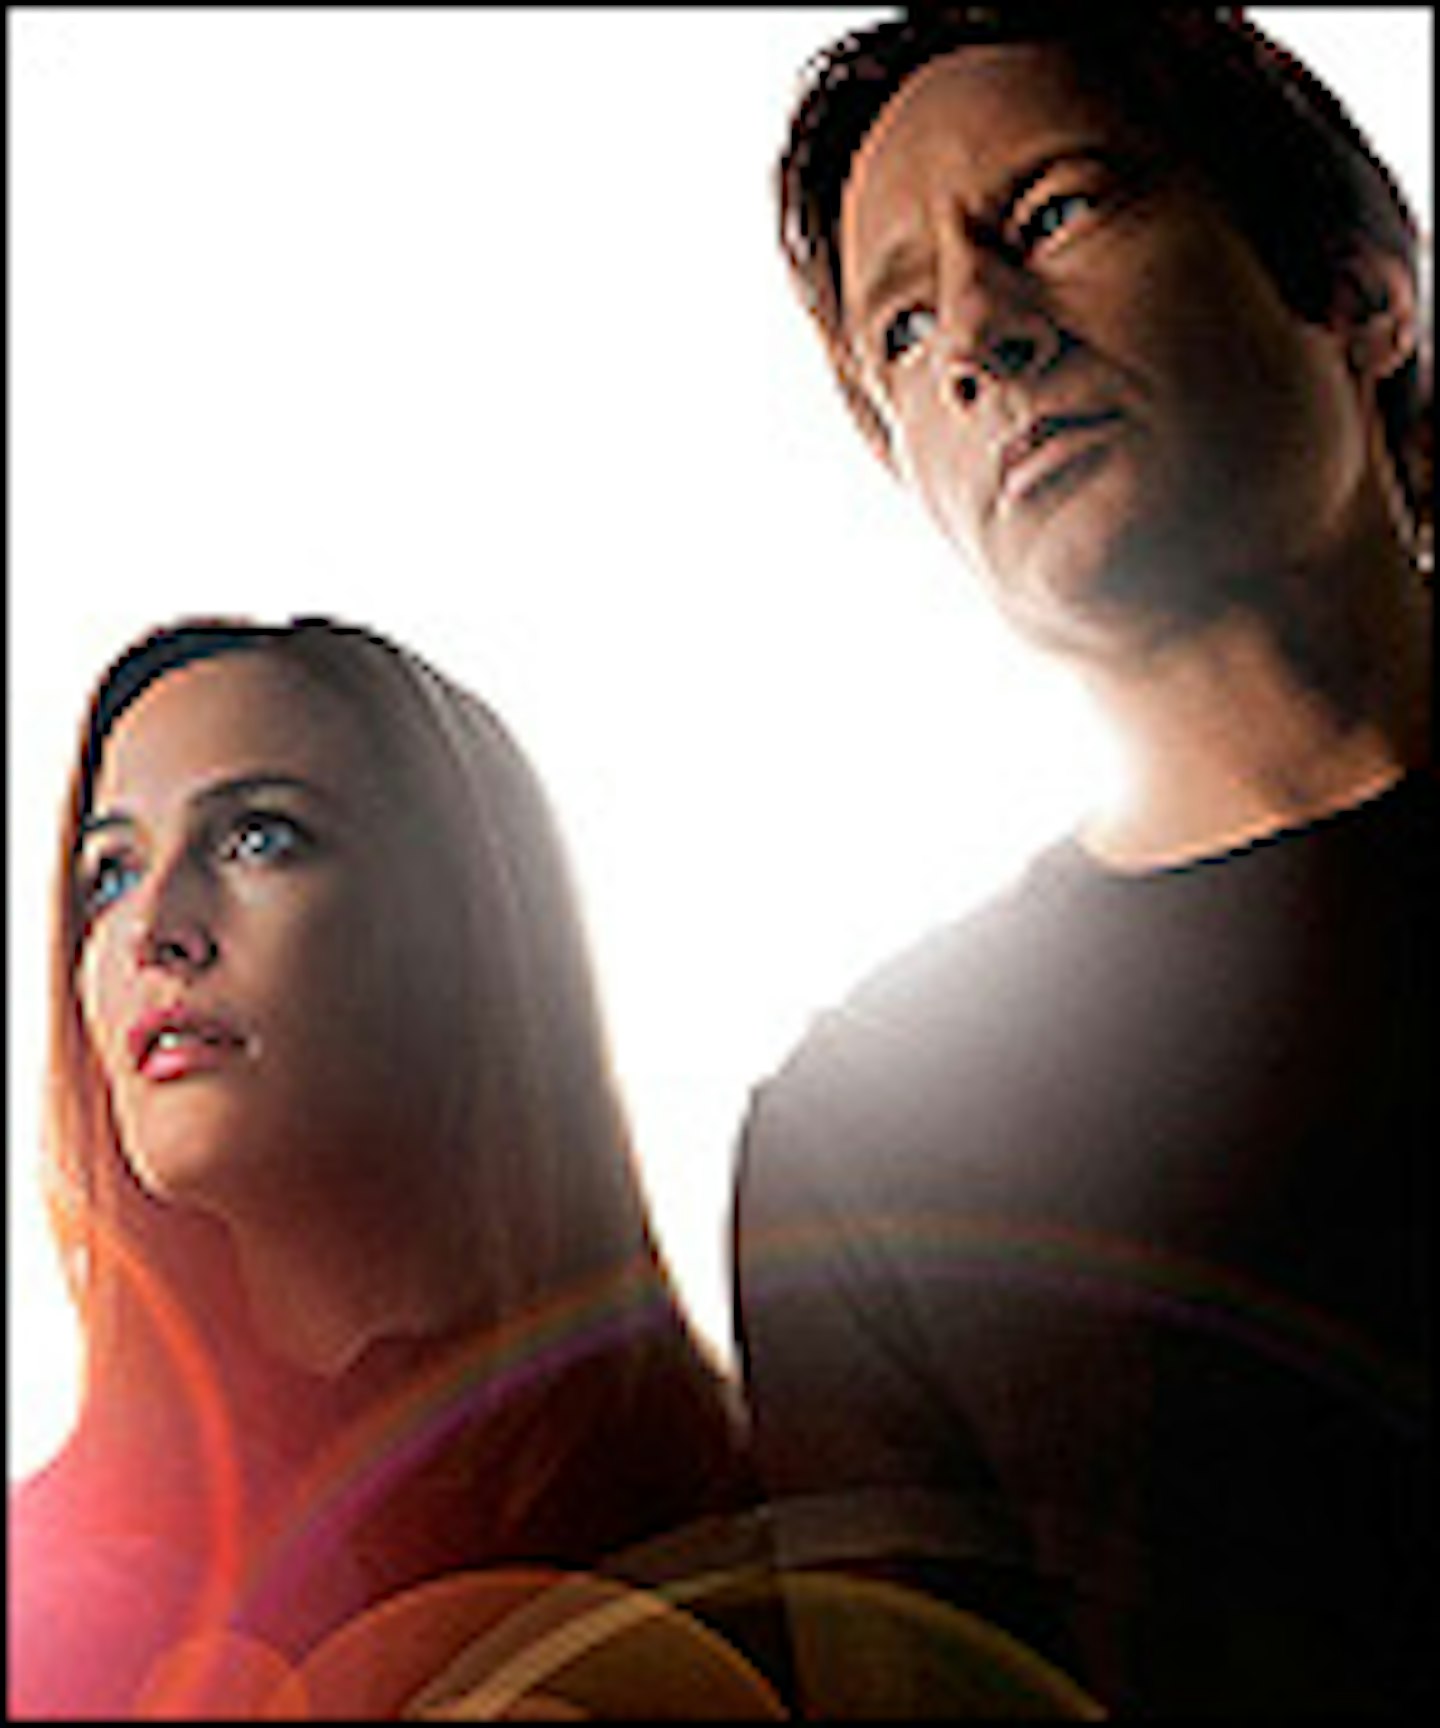 New Images From The New X-Files